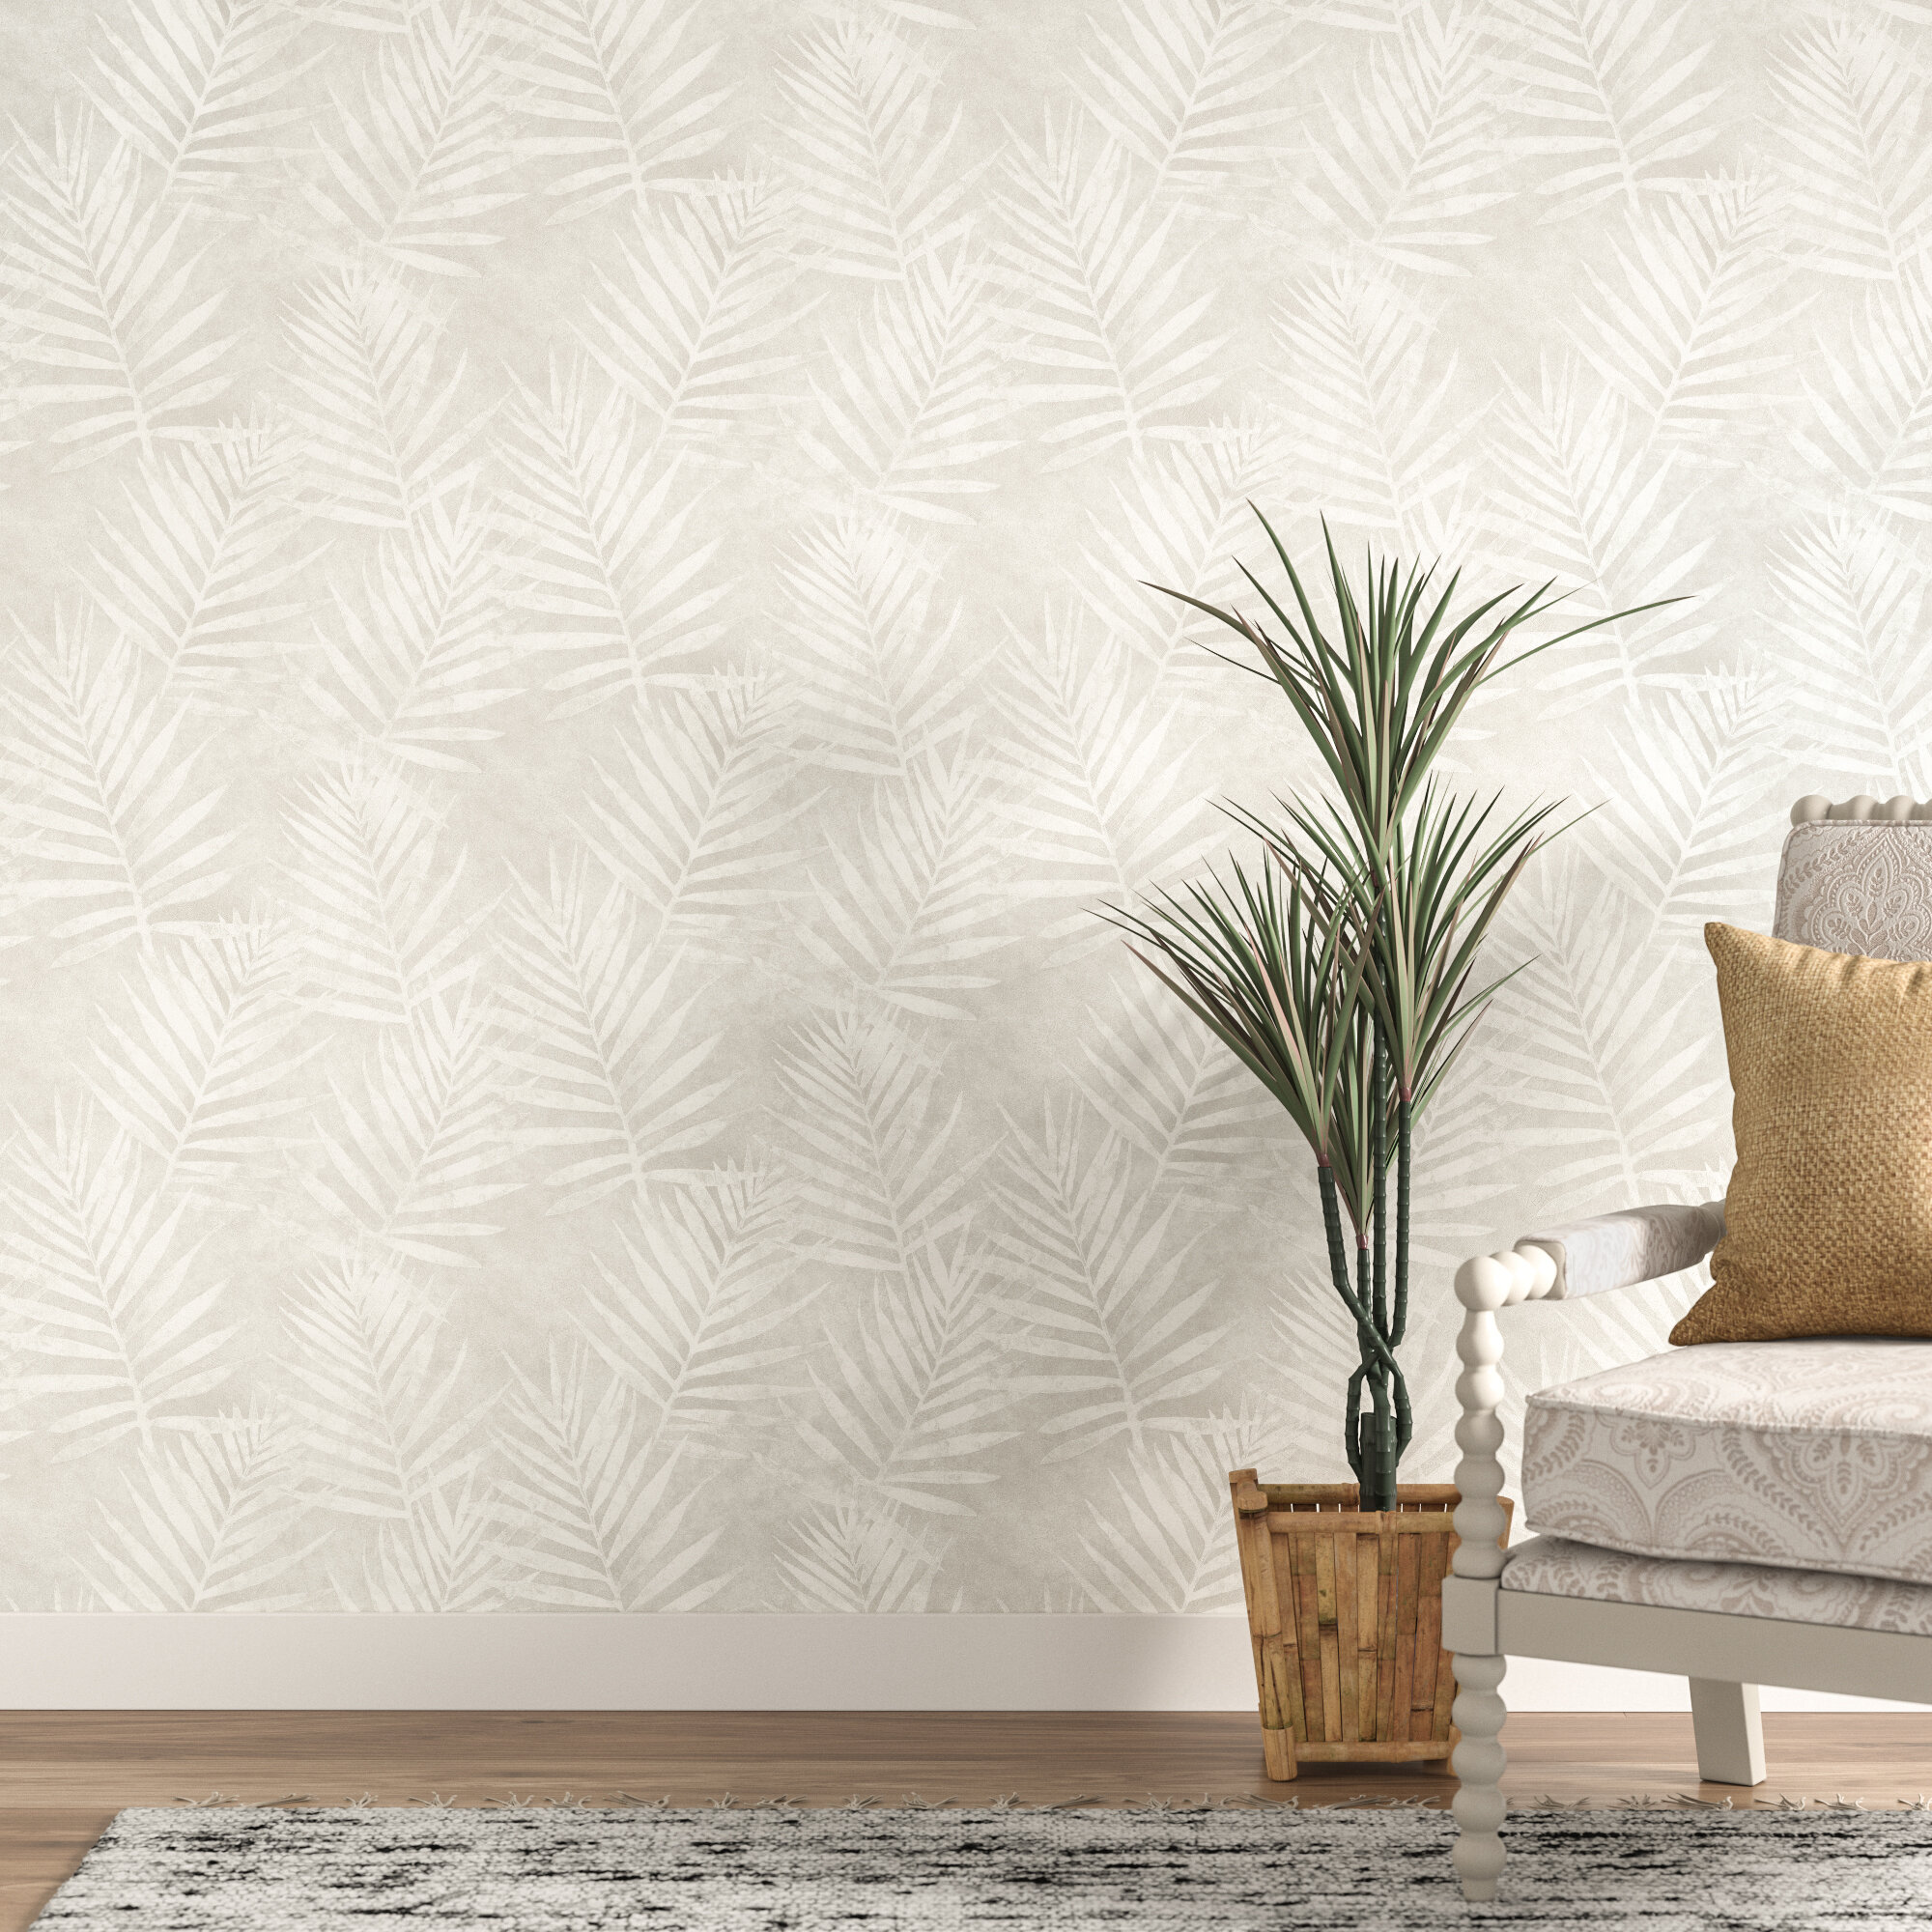 54 Latest wallpaper design trends for your home's living room walls